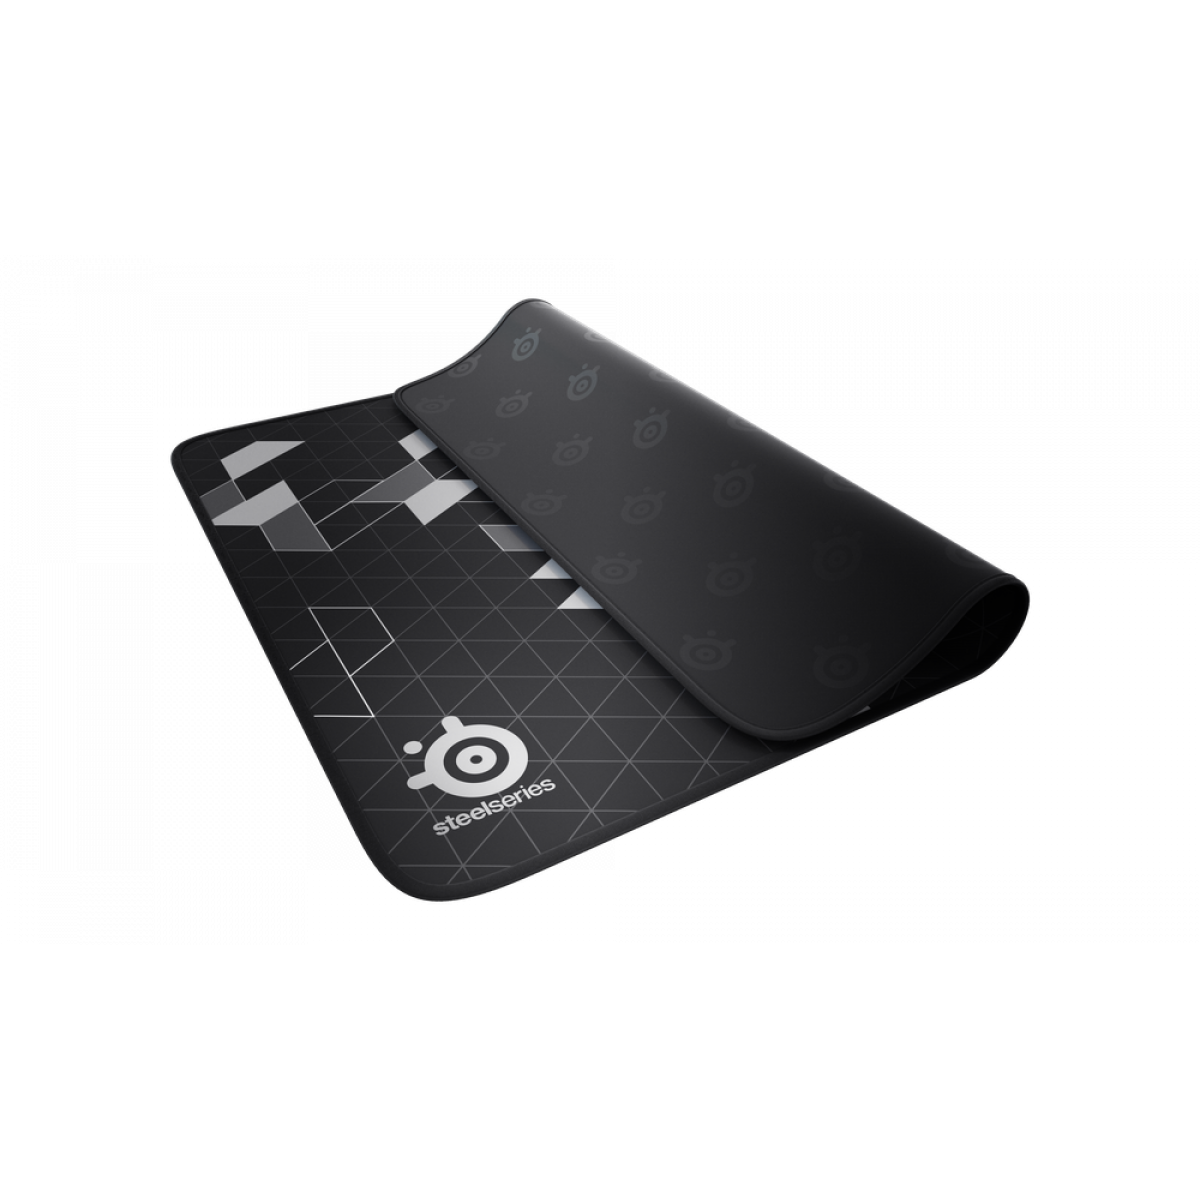 SteelSeries QcK Limited with stitch edges (320mm x 270mm x 3mm)